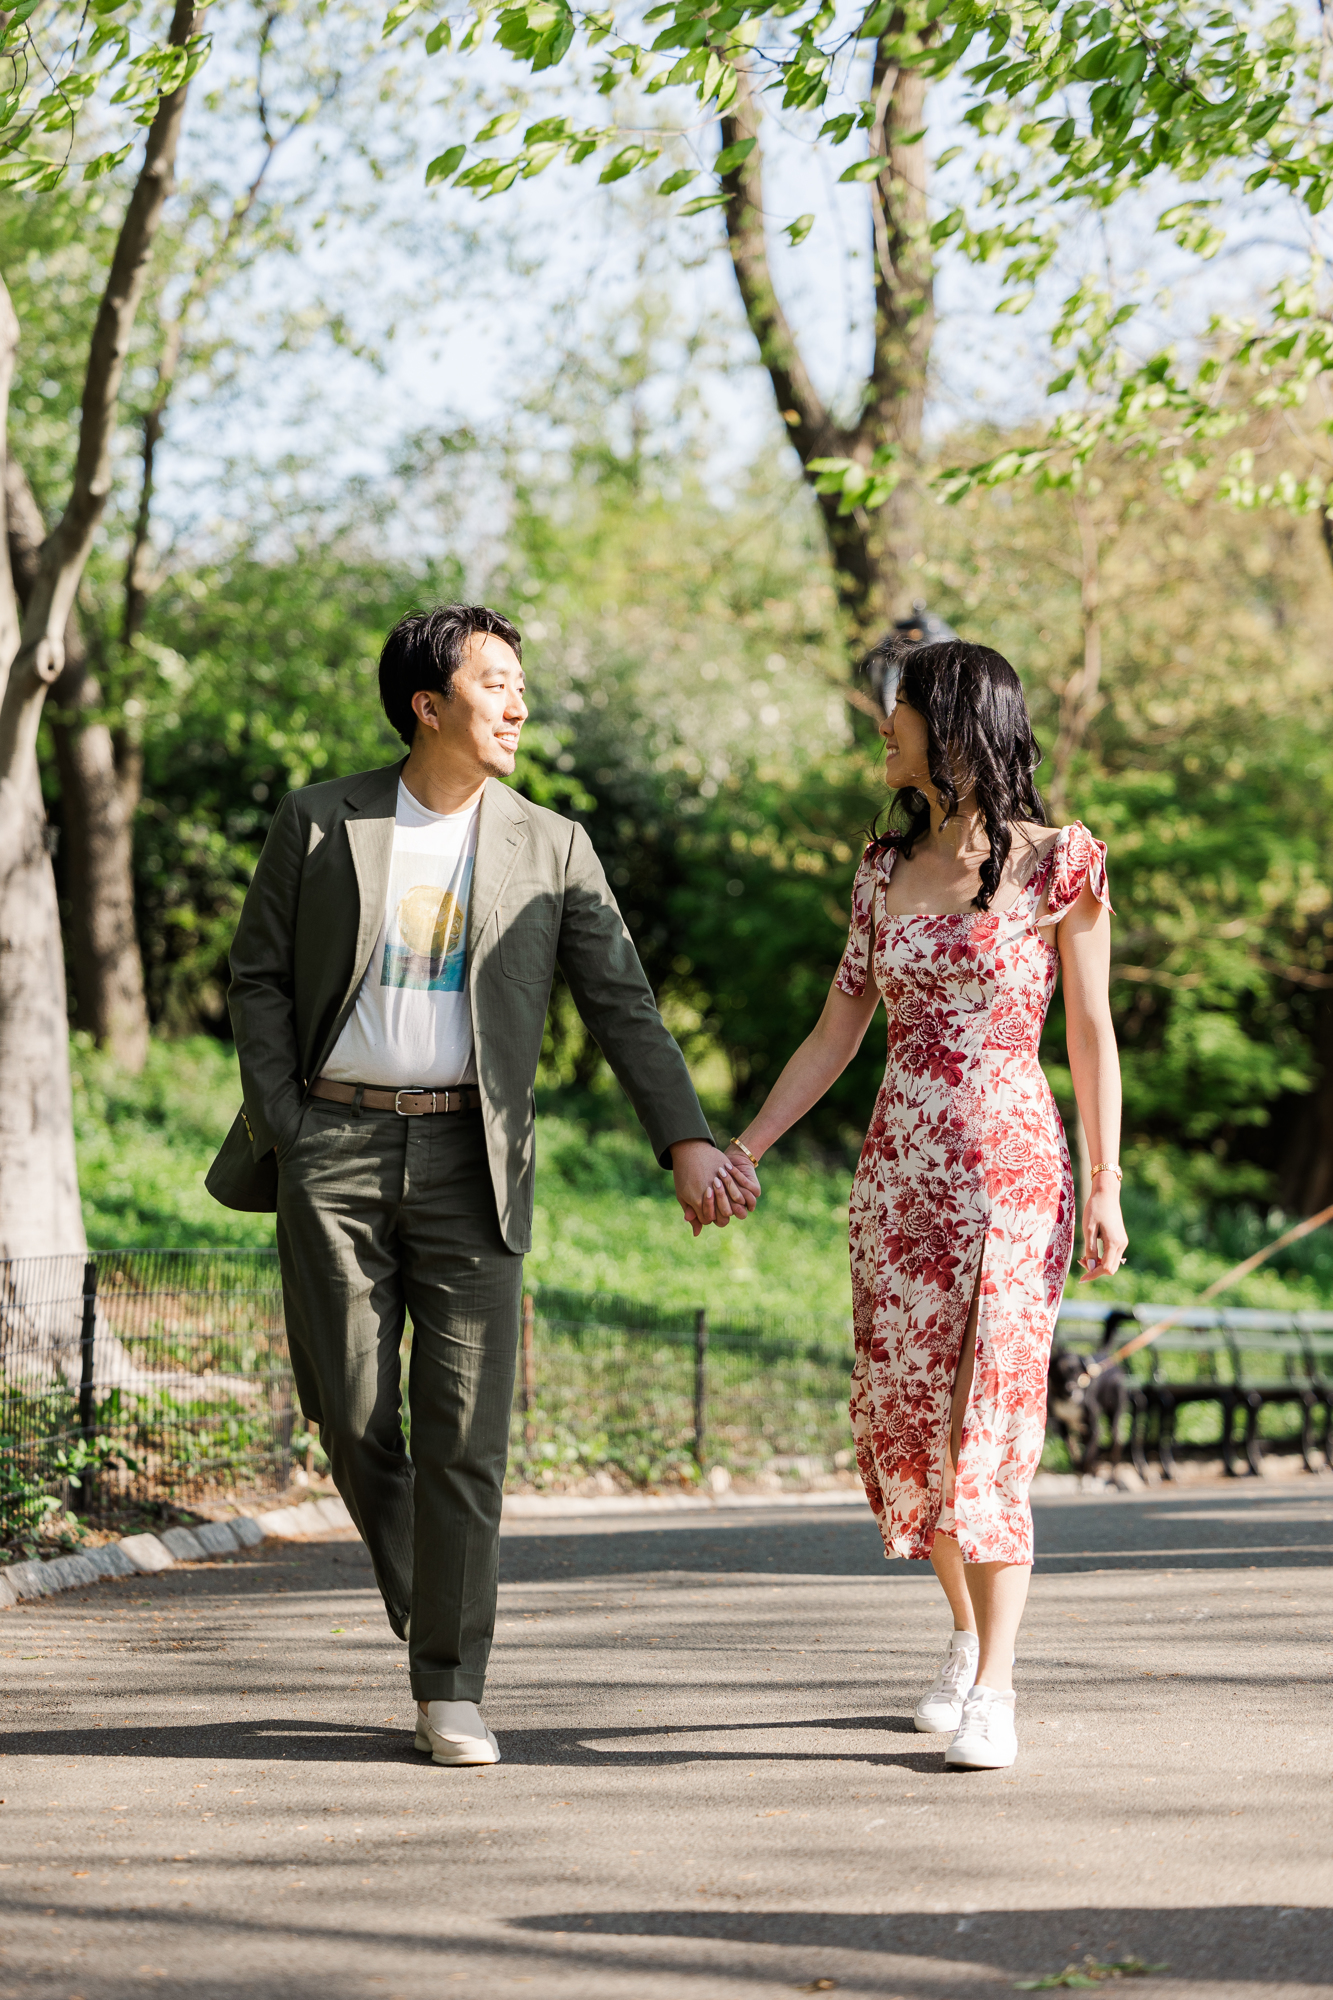 Special Engagement Photos With Cherry Blossoms in NYC